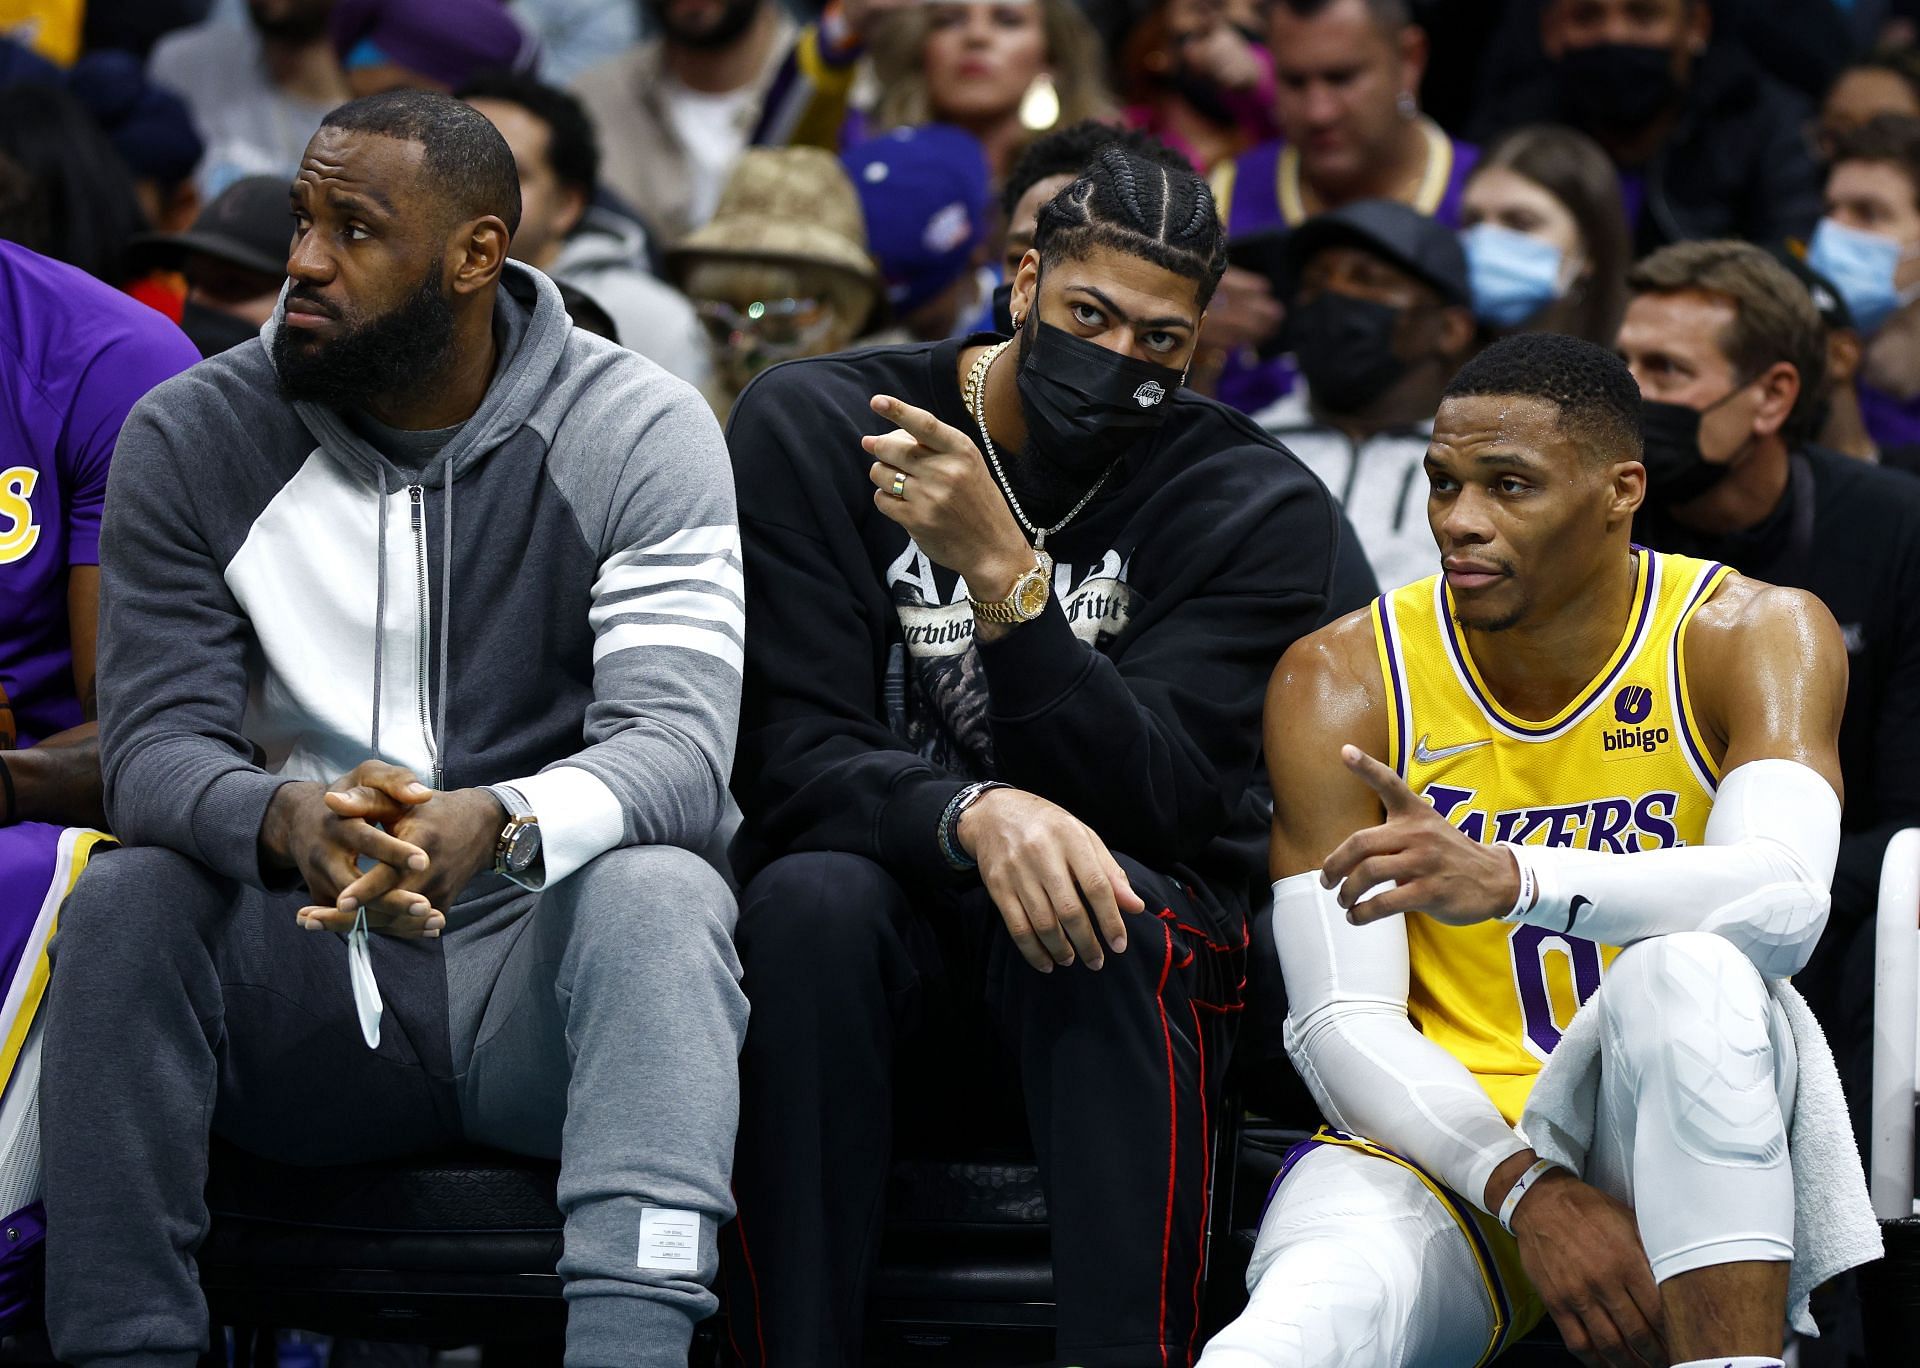 Russell Westbrook, Anthony Davis and LeBron James (from right to left) during the LA Lakers vs Charlotte Hornets game